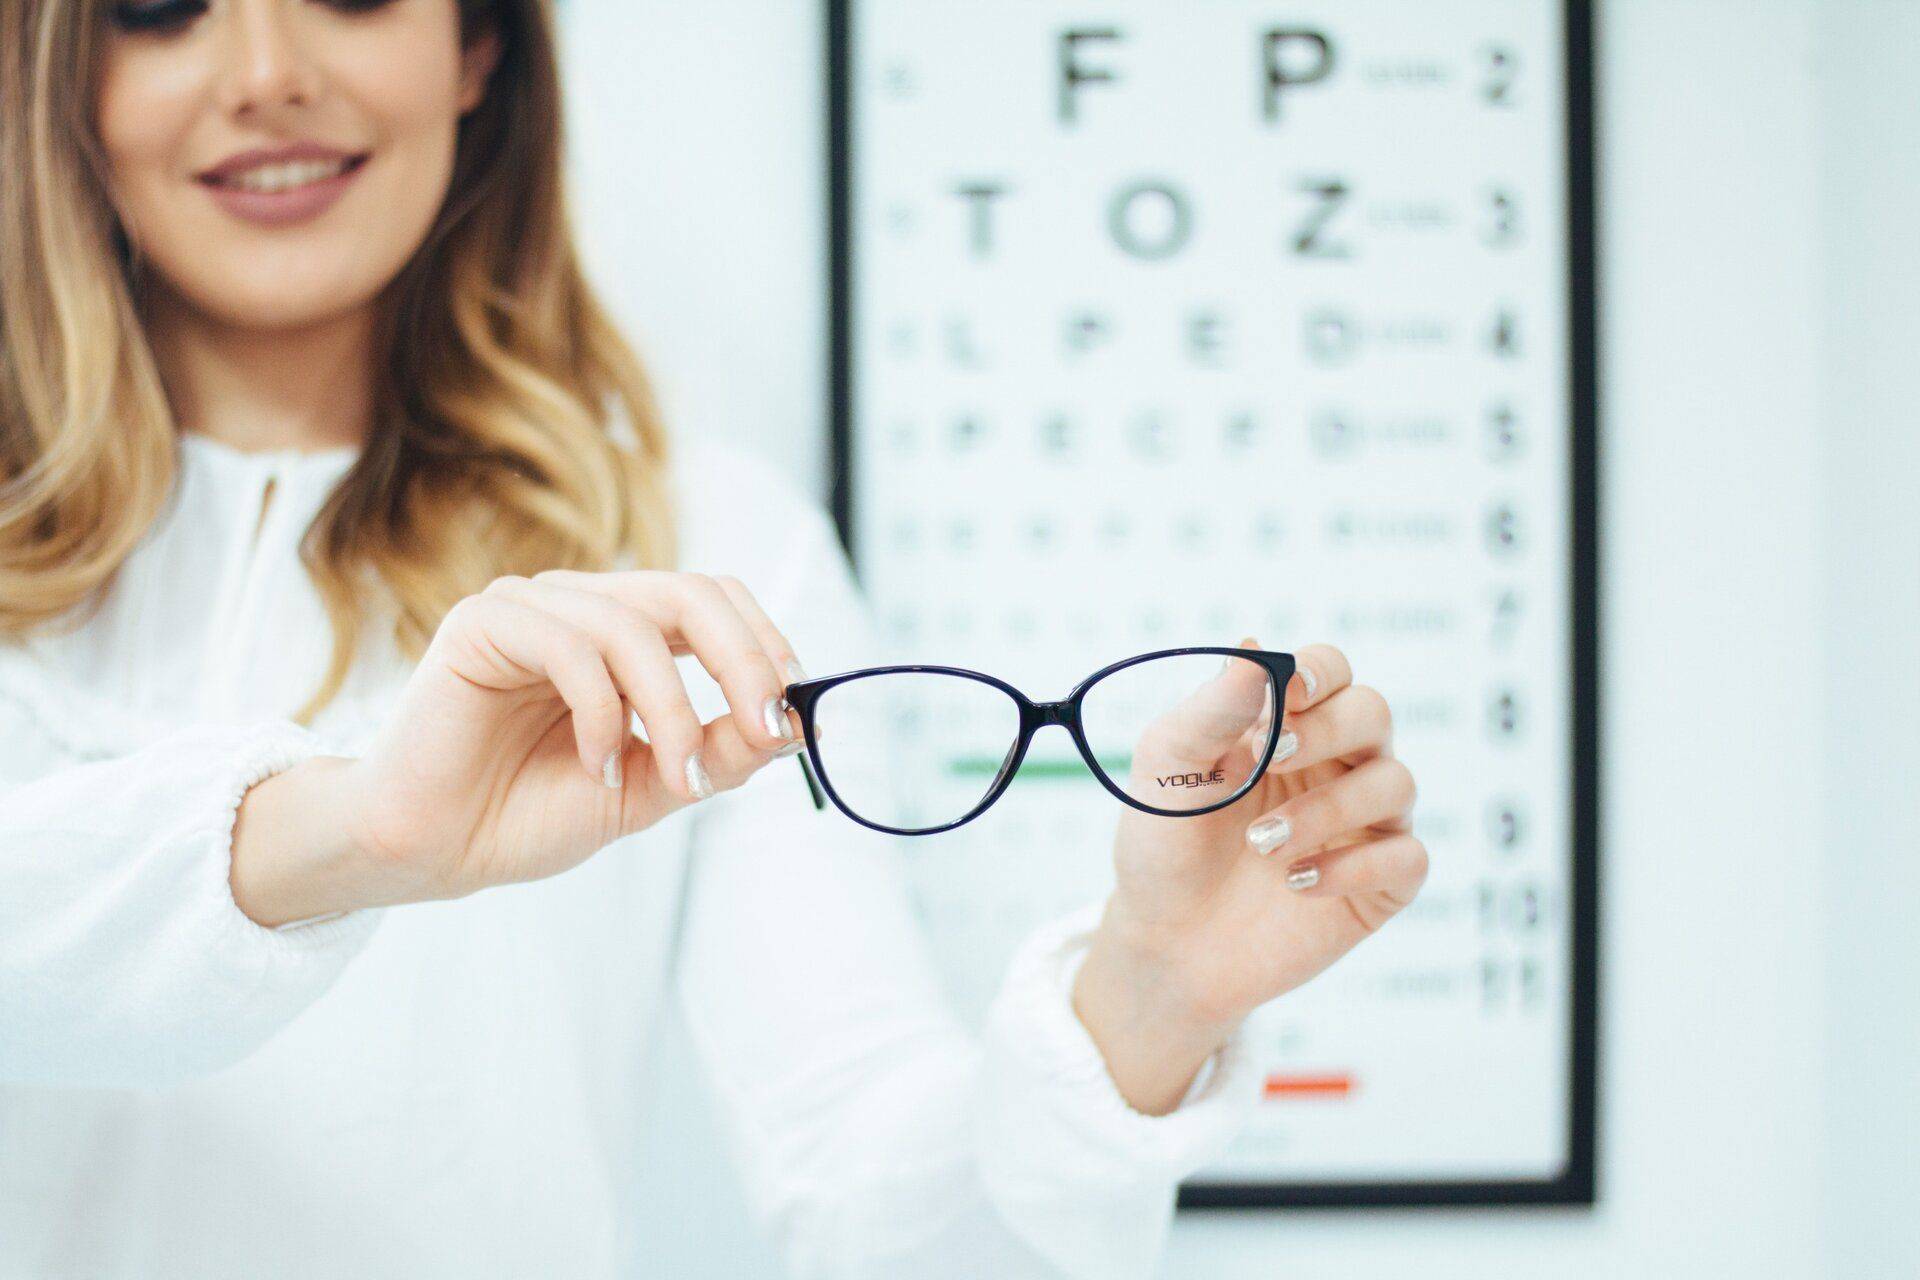 woman holding up a pair of glasses in front of an eye chart